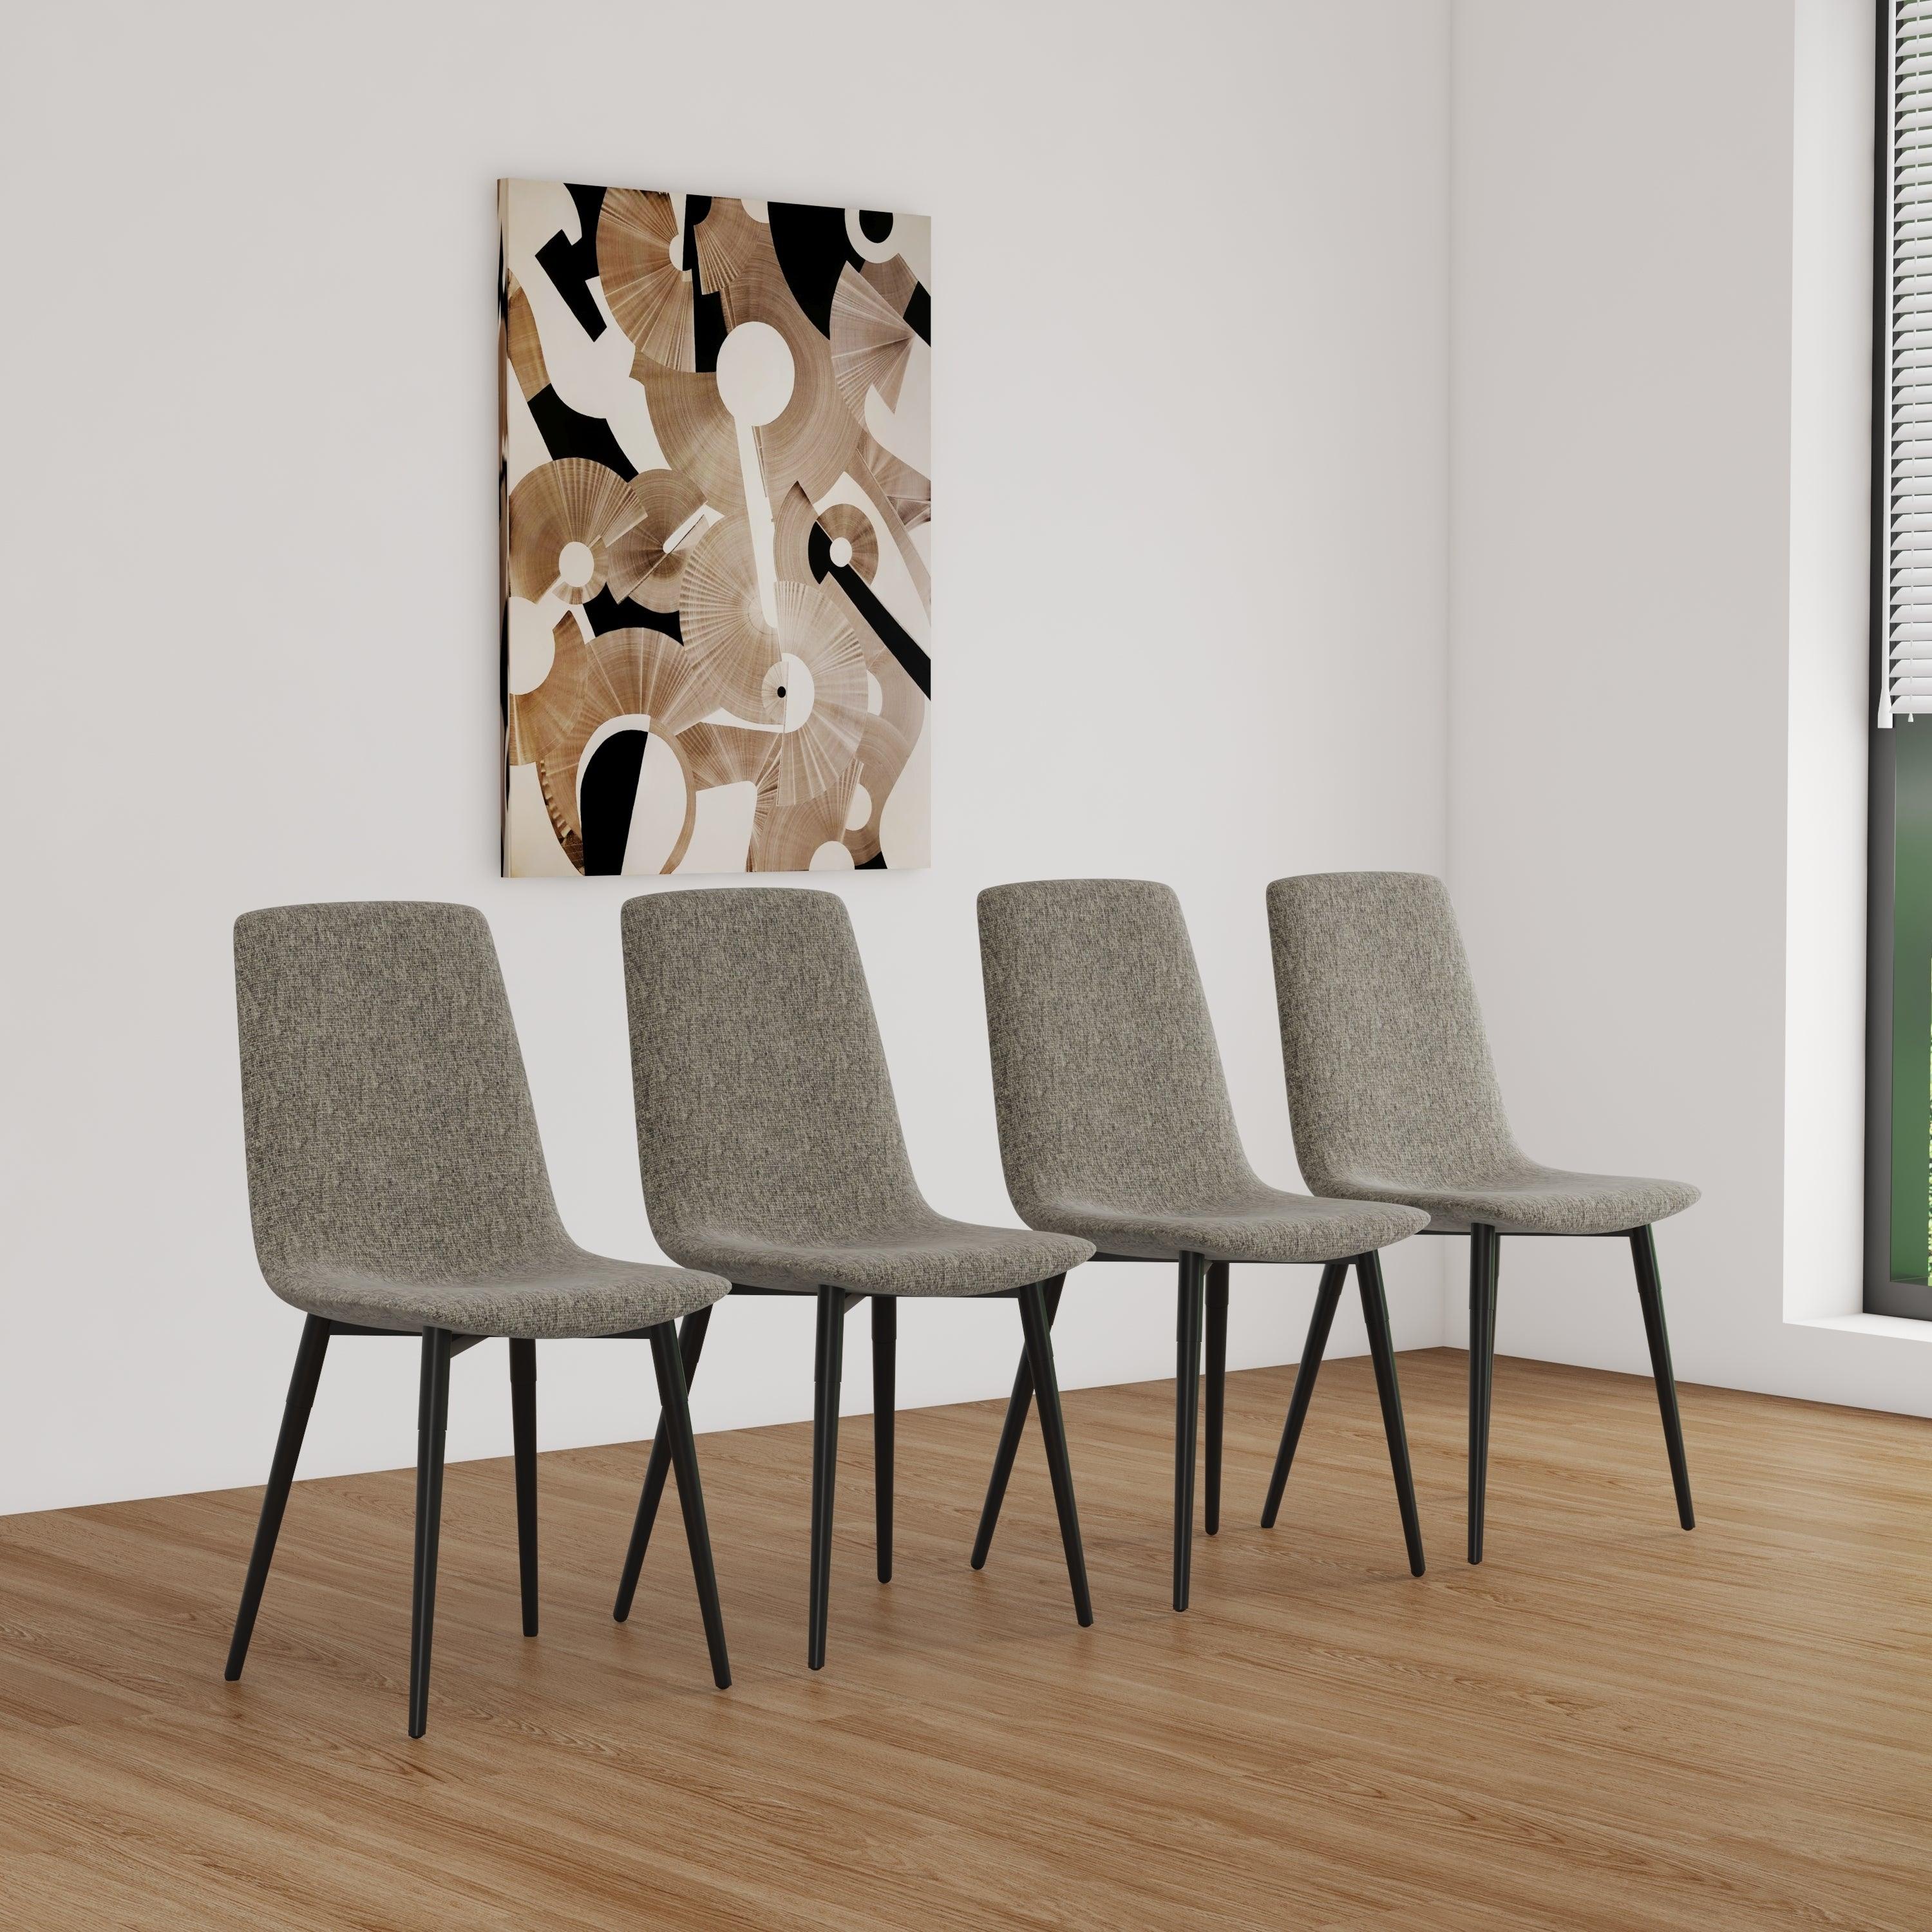 🆓🚛 Dining Chairs Set Of 4, Modern Kitchen Dining Room Chairs, Upholstered Dining Accent Chairs in Linen Cushion Seat & Sturdy Black Metal Legs (Gray)